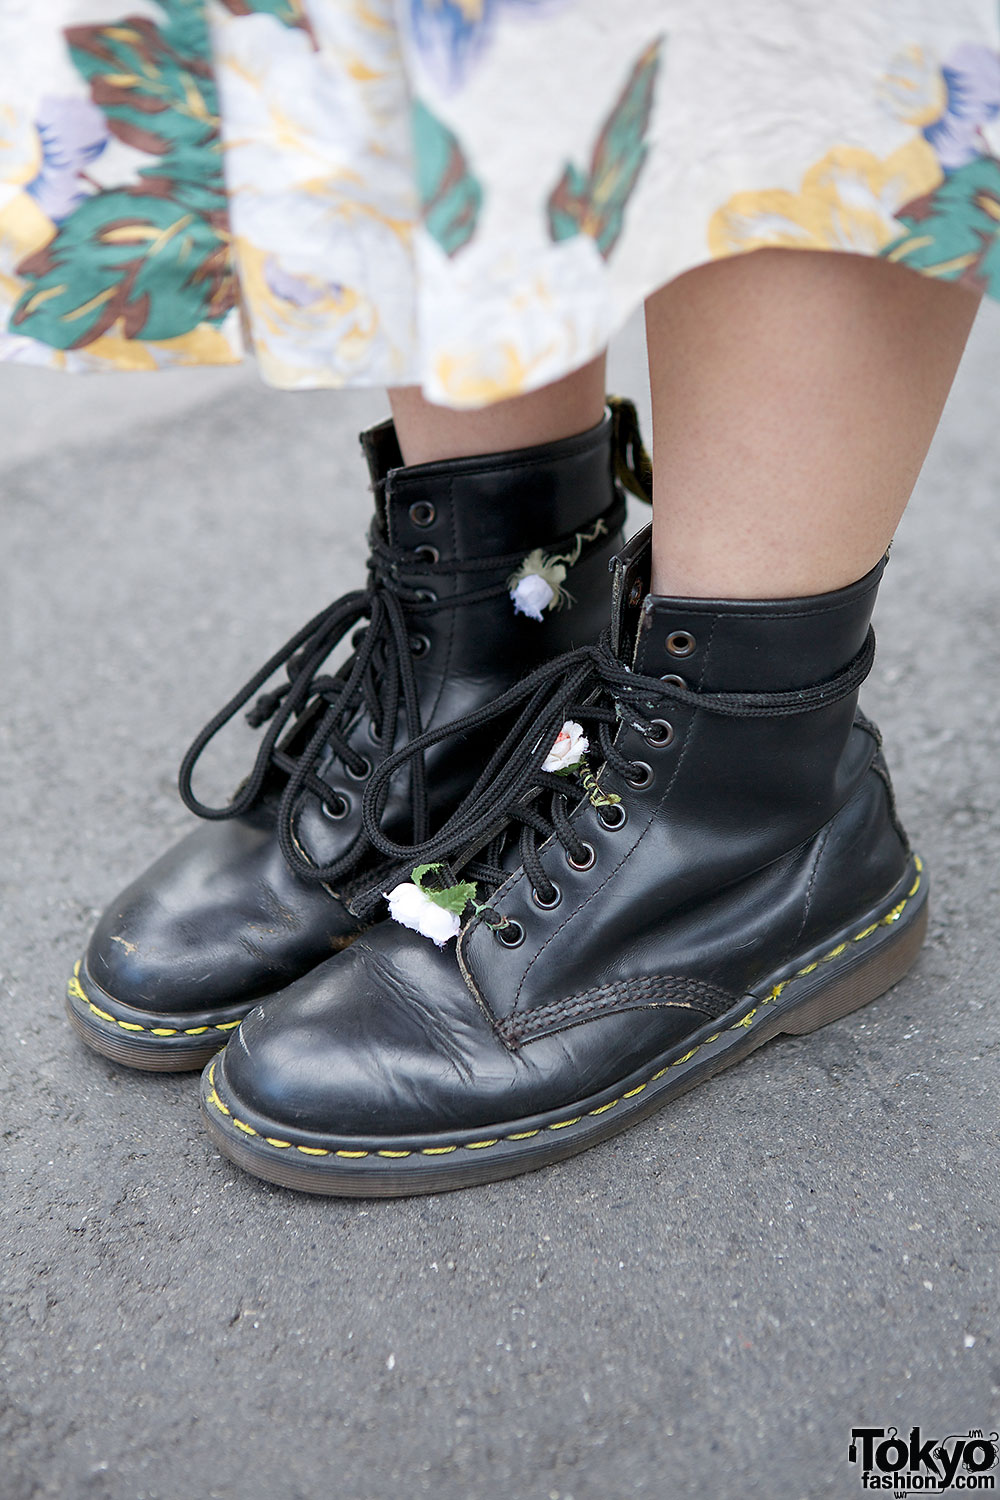 Vivienne Westwood & Chanel vs. Patched Hat & Buckle Shoes in Harajuku –  Tokyo Fashion